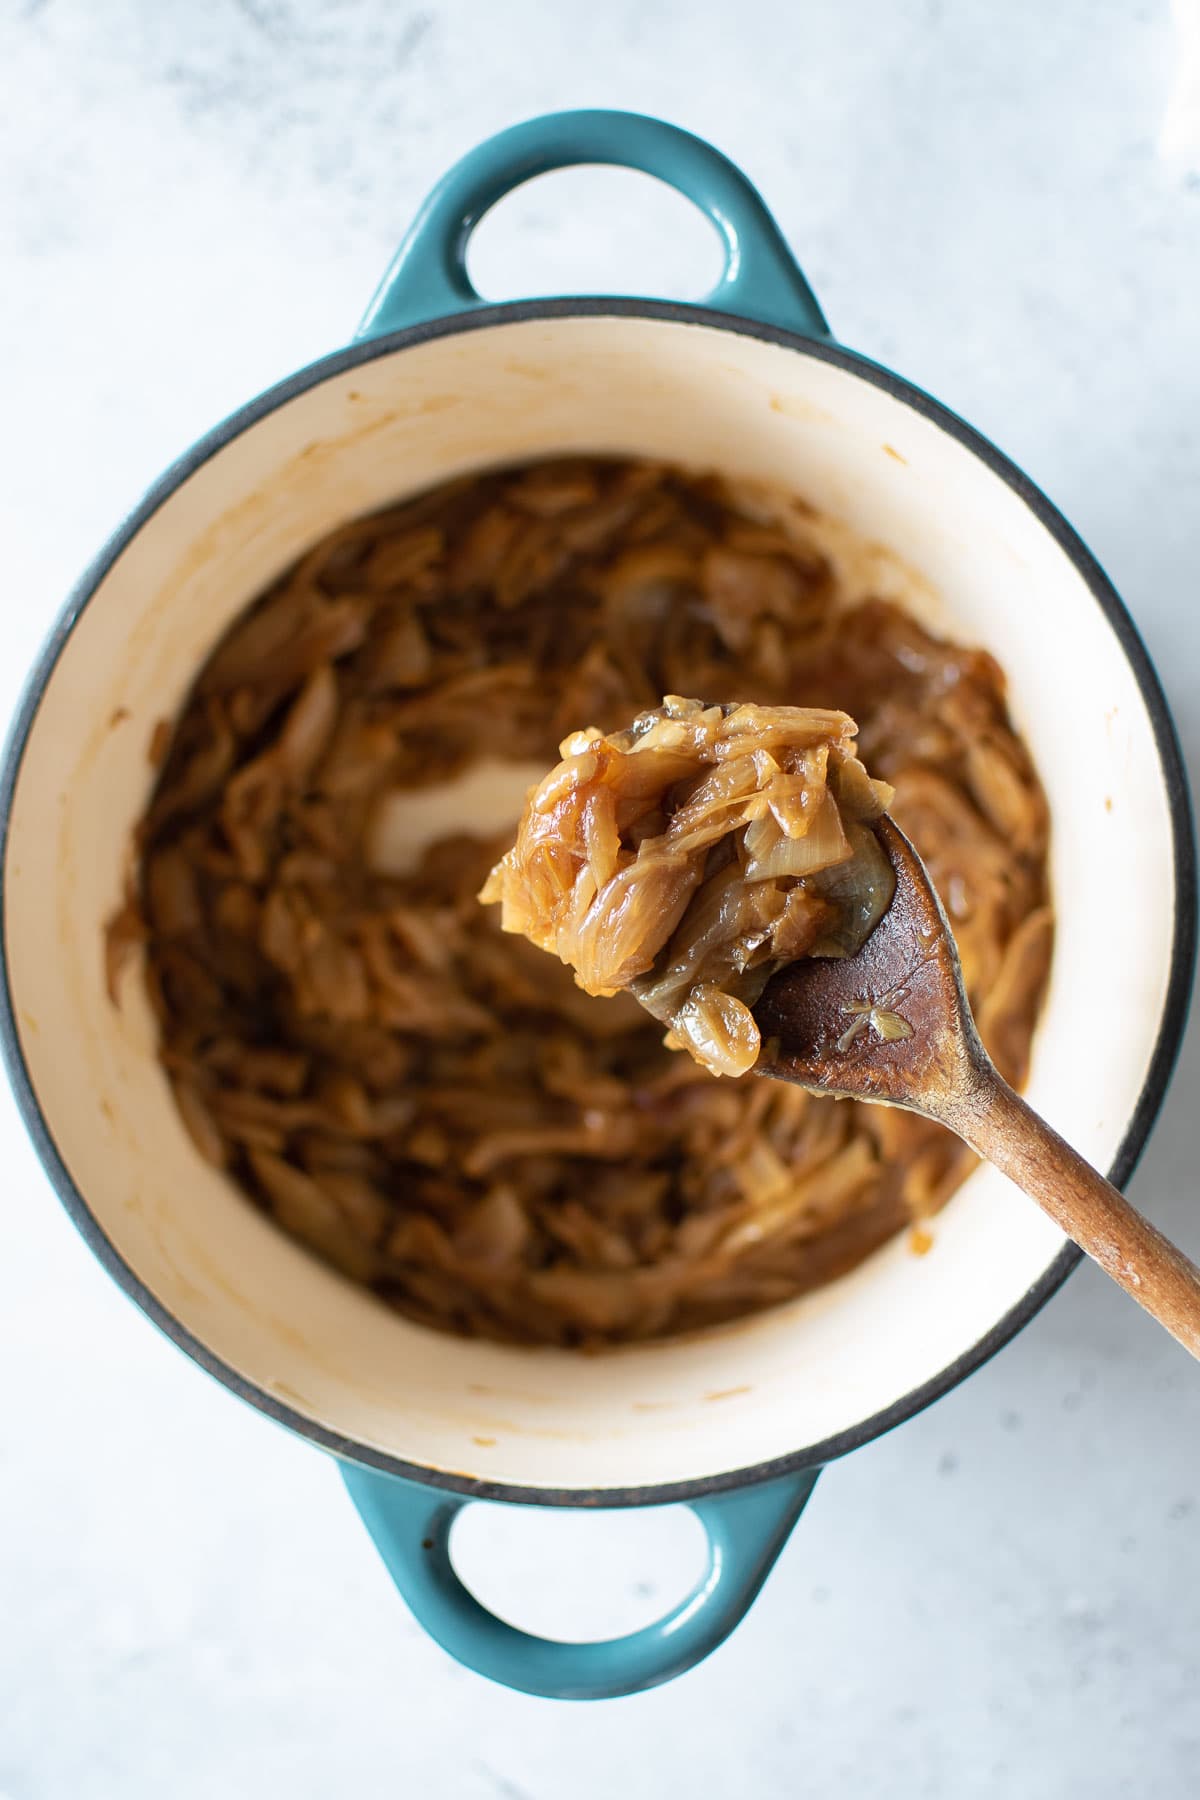 A wooden spoon lifting up some caramelized onions from a pot.